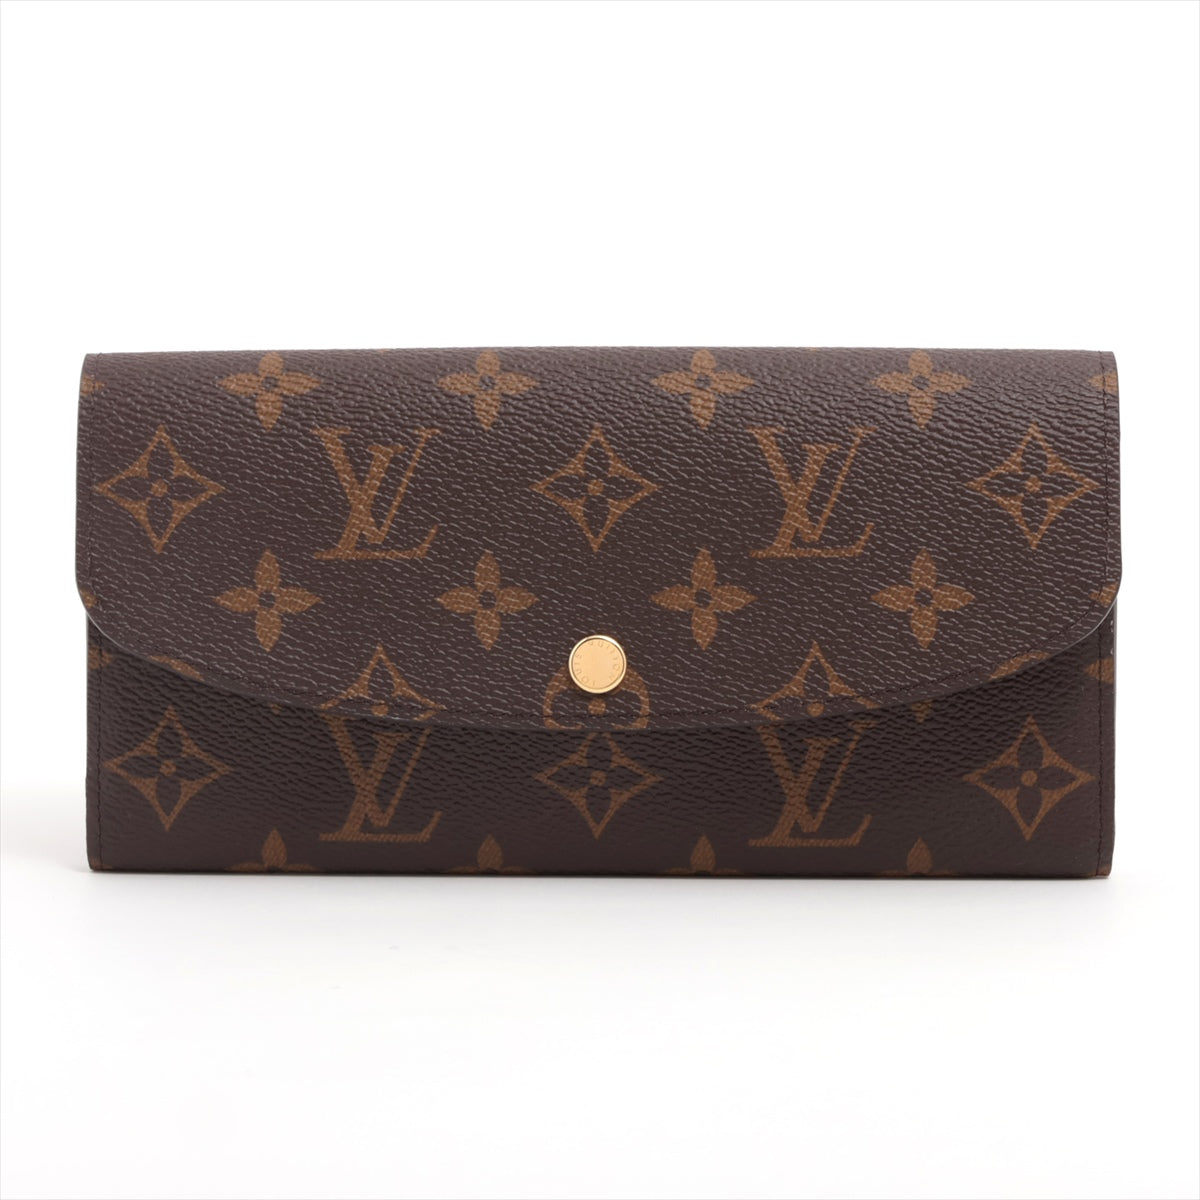 Louis Vuitton Monogram Portefeuille Emilie M60697 There was an RFID response